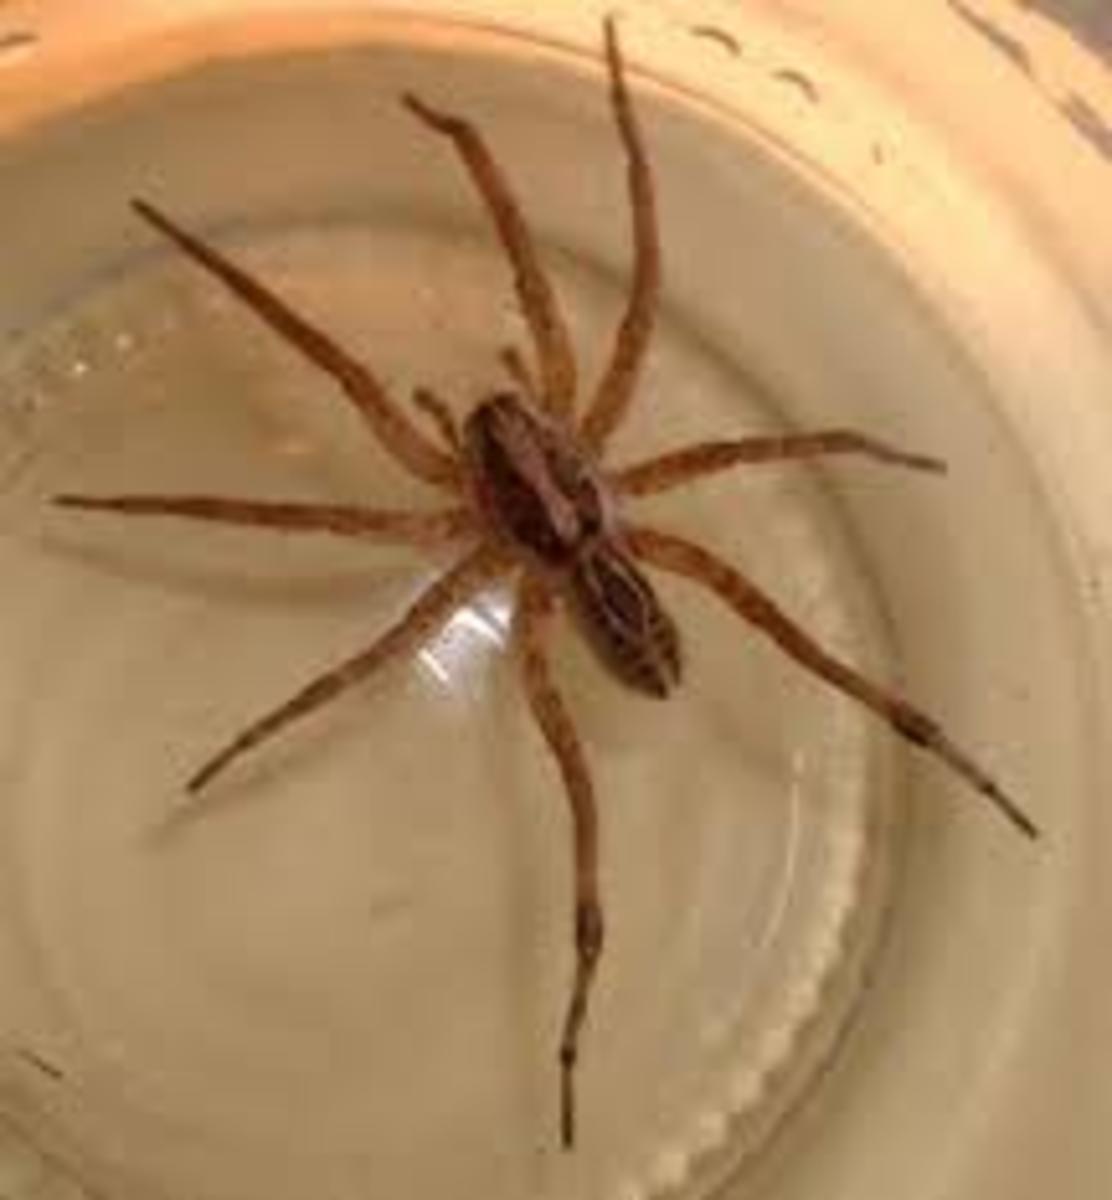 Wolf Spider Bite: What You Need To Do? | HubPages